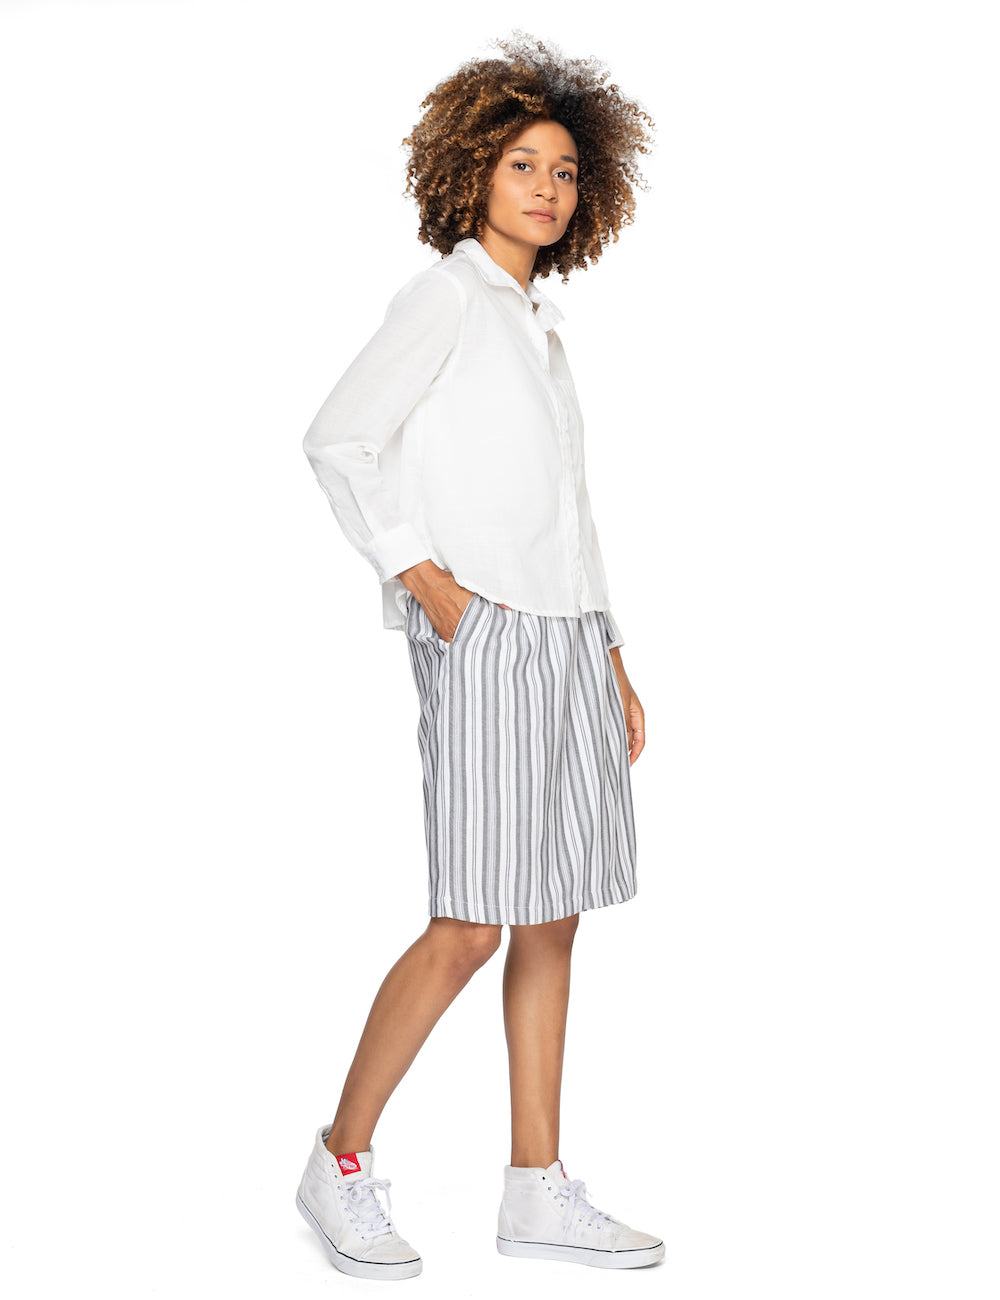 Boxy like a boyfriend shirt but shorter. This button-up is the perfect mid-layer for the office, a casual date, or a business meeting. Made from slub cotton for a subtle texture throughout.